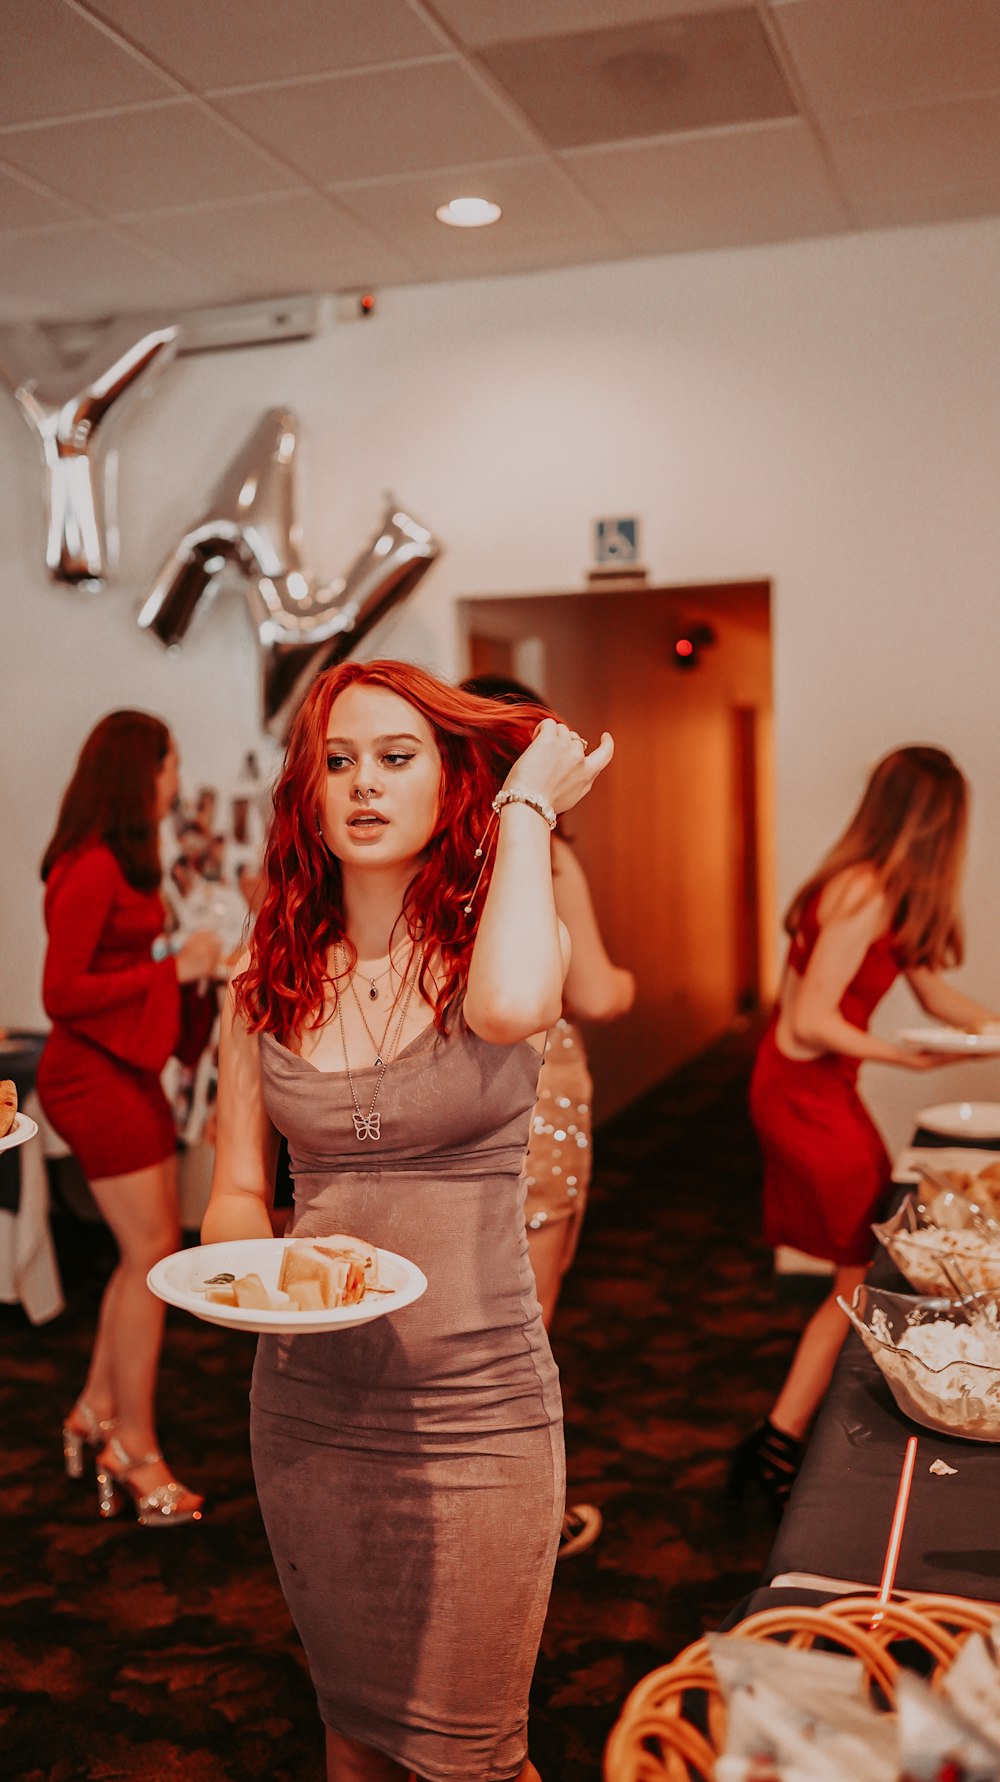 a person in a dress holding a plate of food